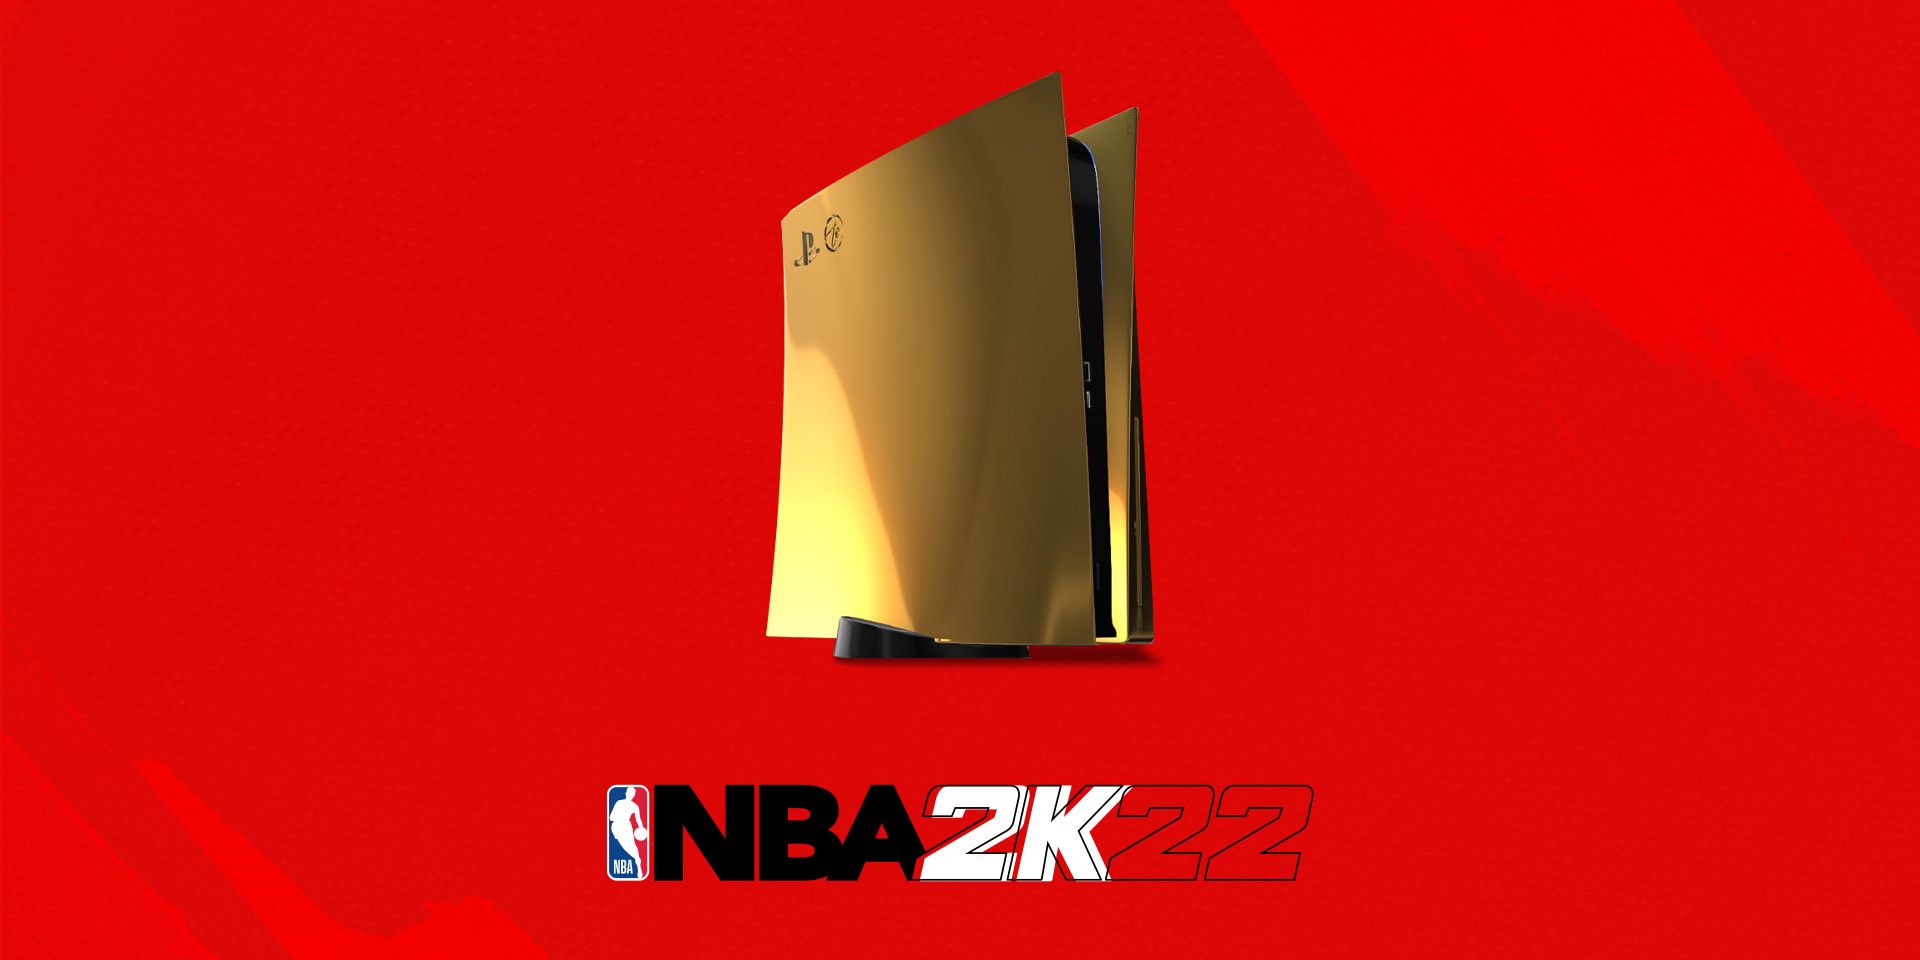 The 24k Gold PlayStation PS5™ console